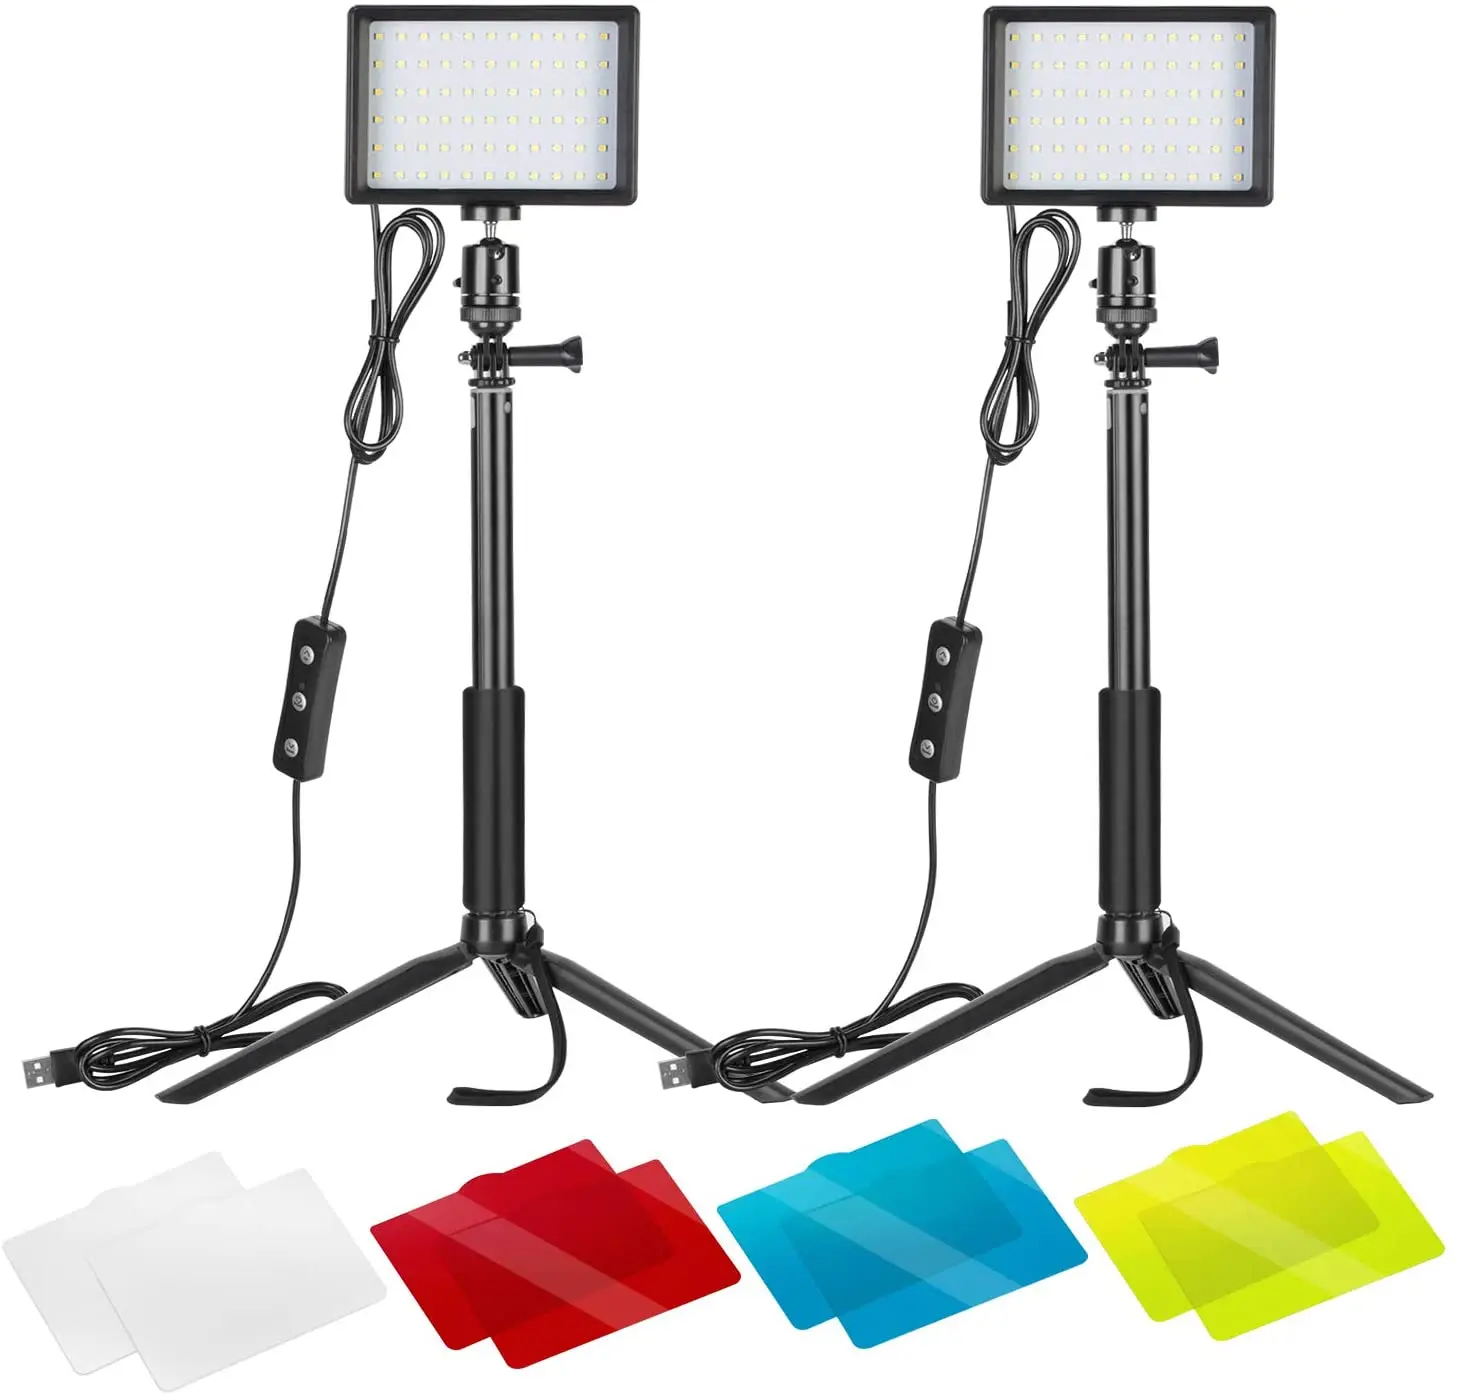 2 Packs Dimmable 5600K USB LED Video Light with Adjustable Tripod Stand and Color Filters For Live Streaming